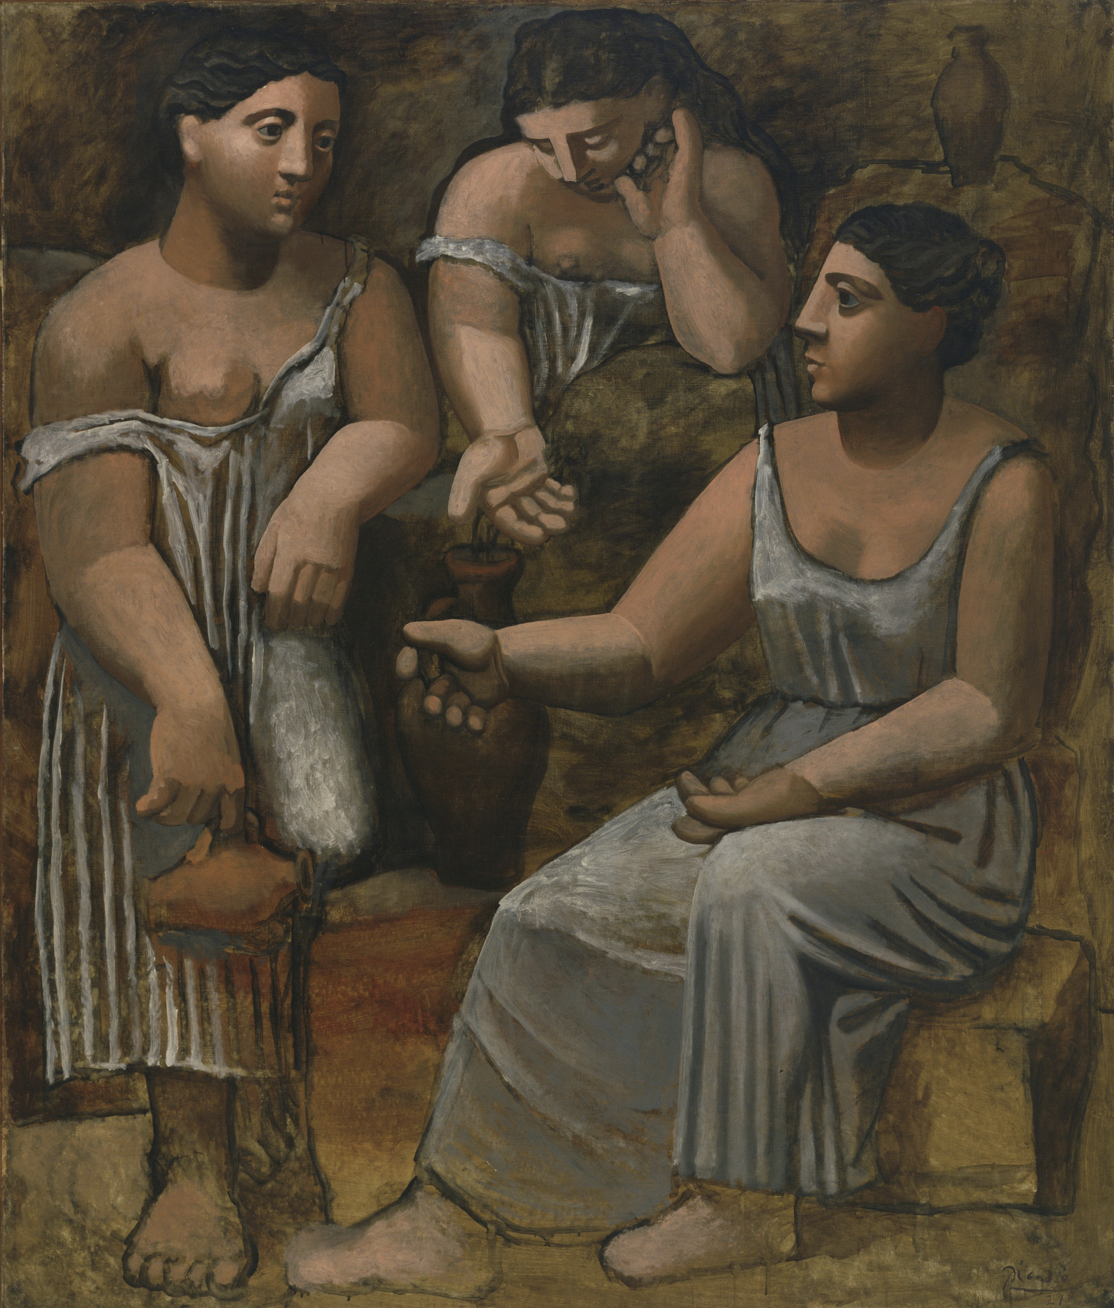 Pablo Picasso, "Three Women at the Spring," 1921, oil on canvas, 203.9 x 174 cm, MOMA, New York, USA